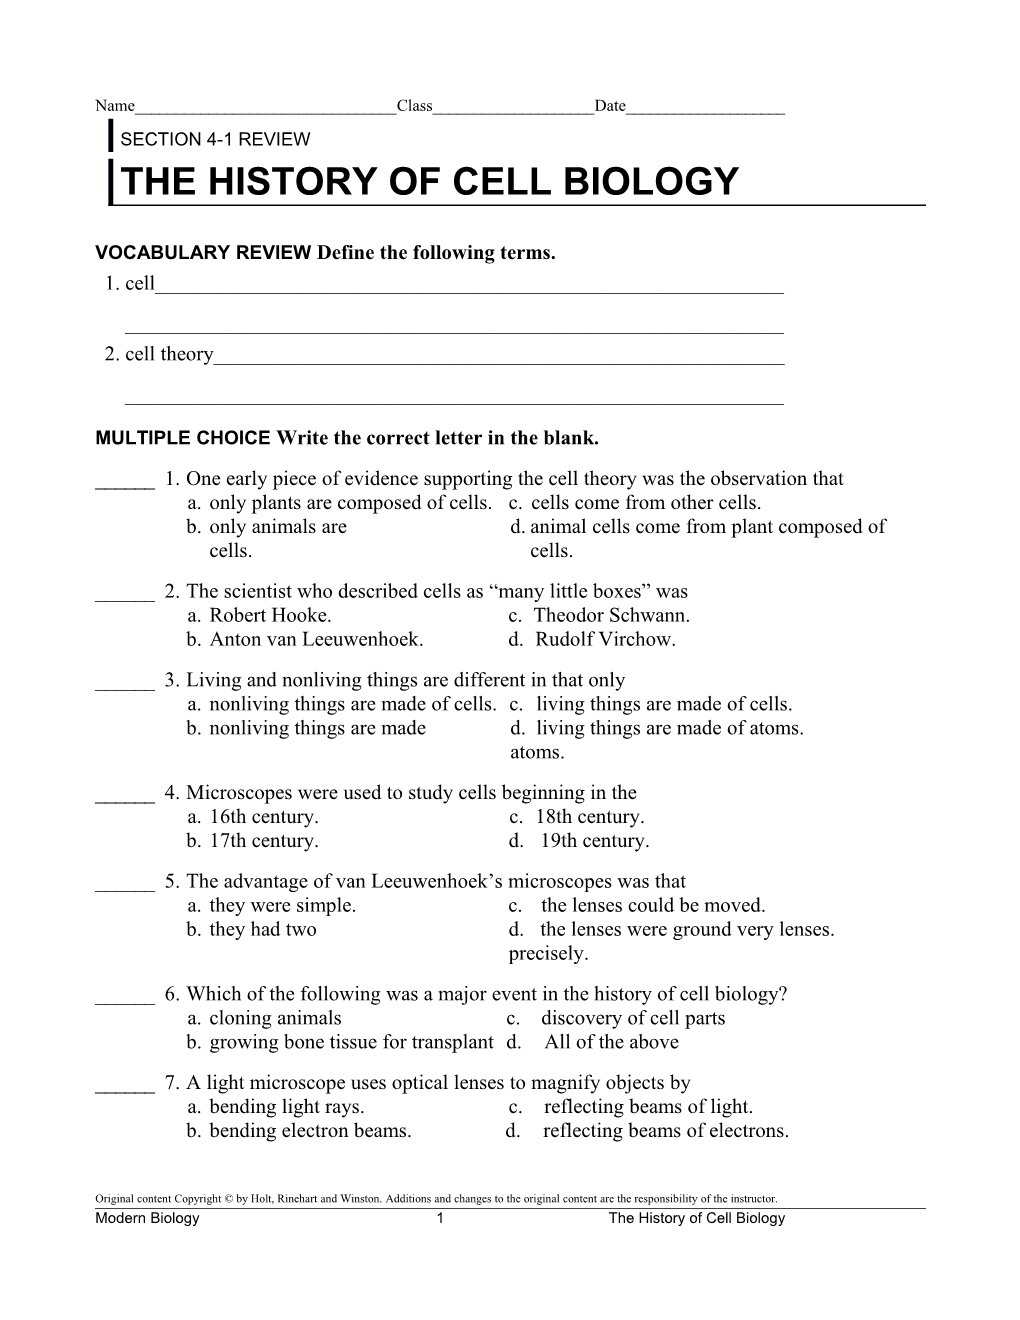 The History of Cell Biology